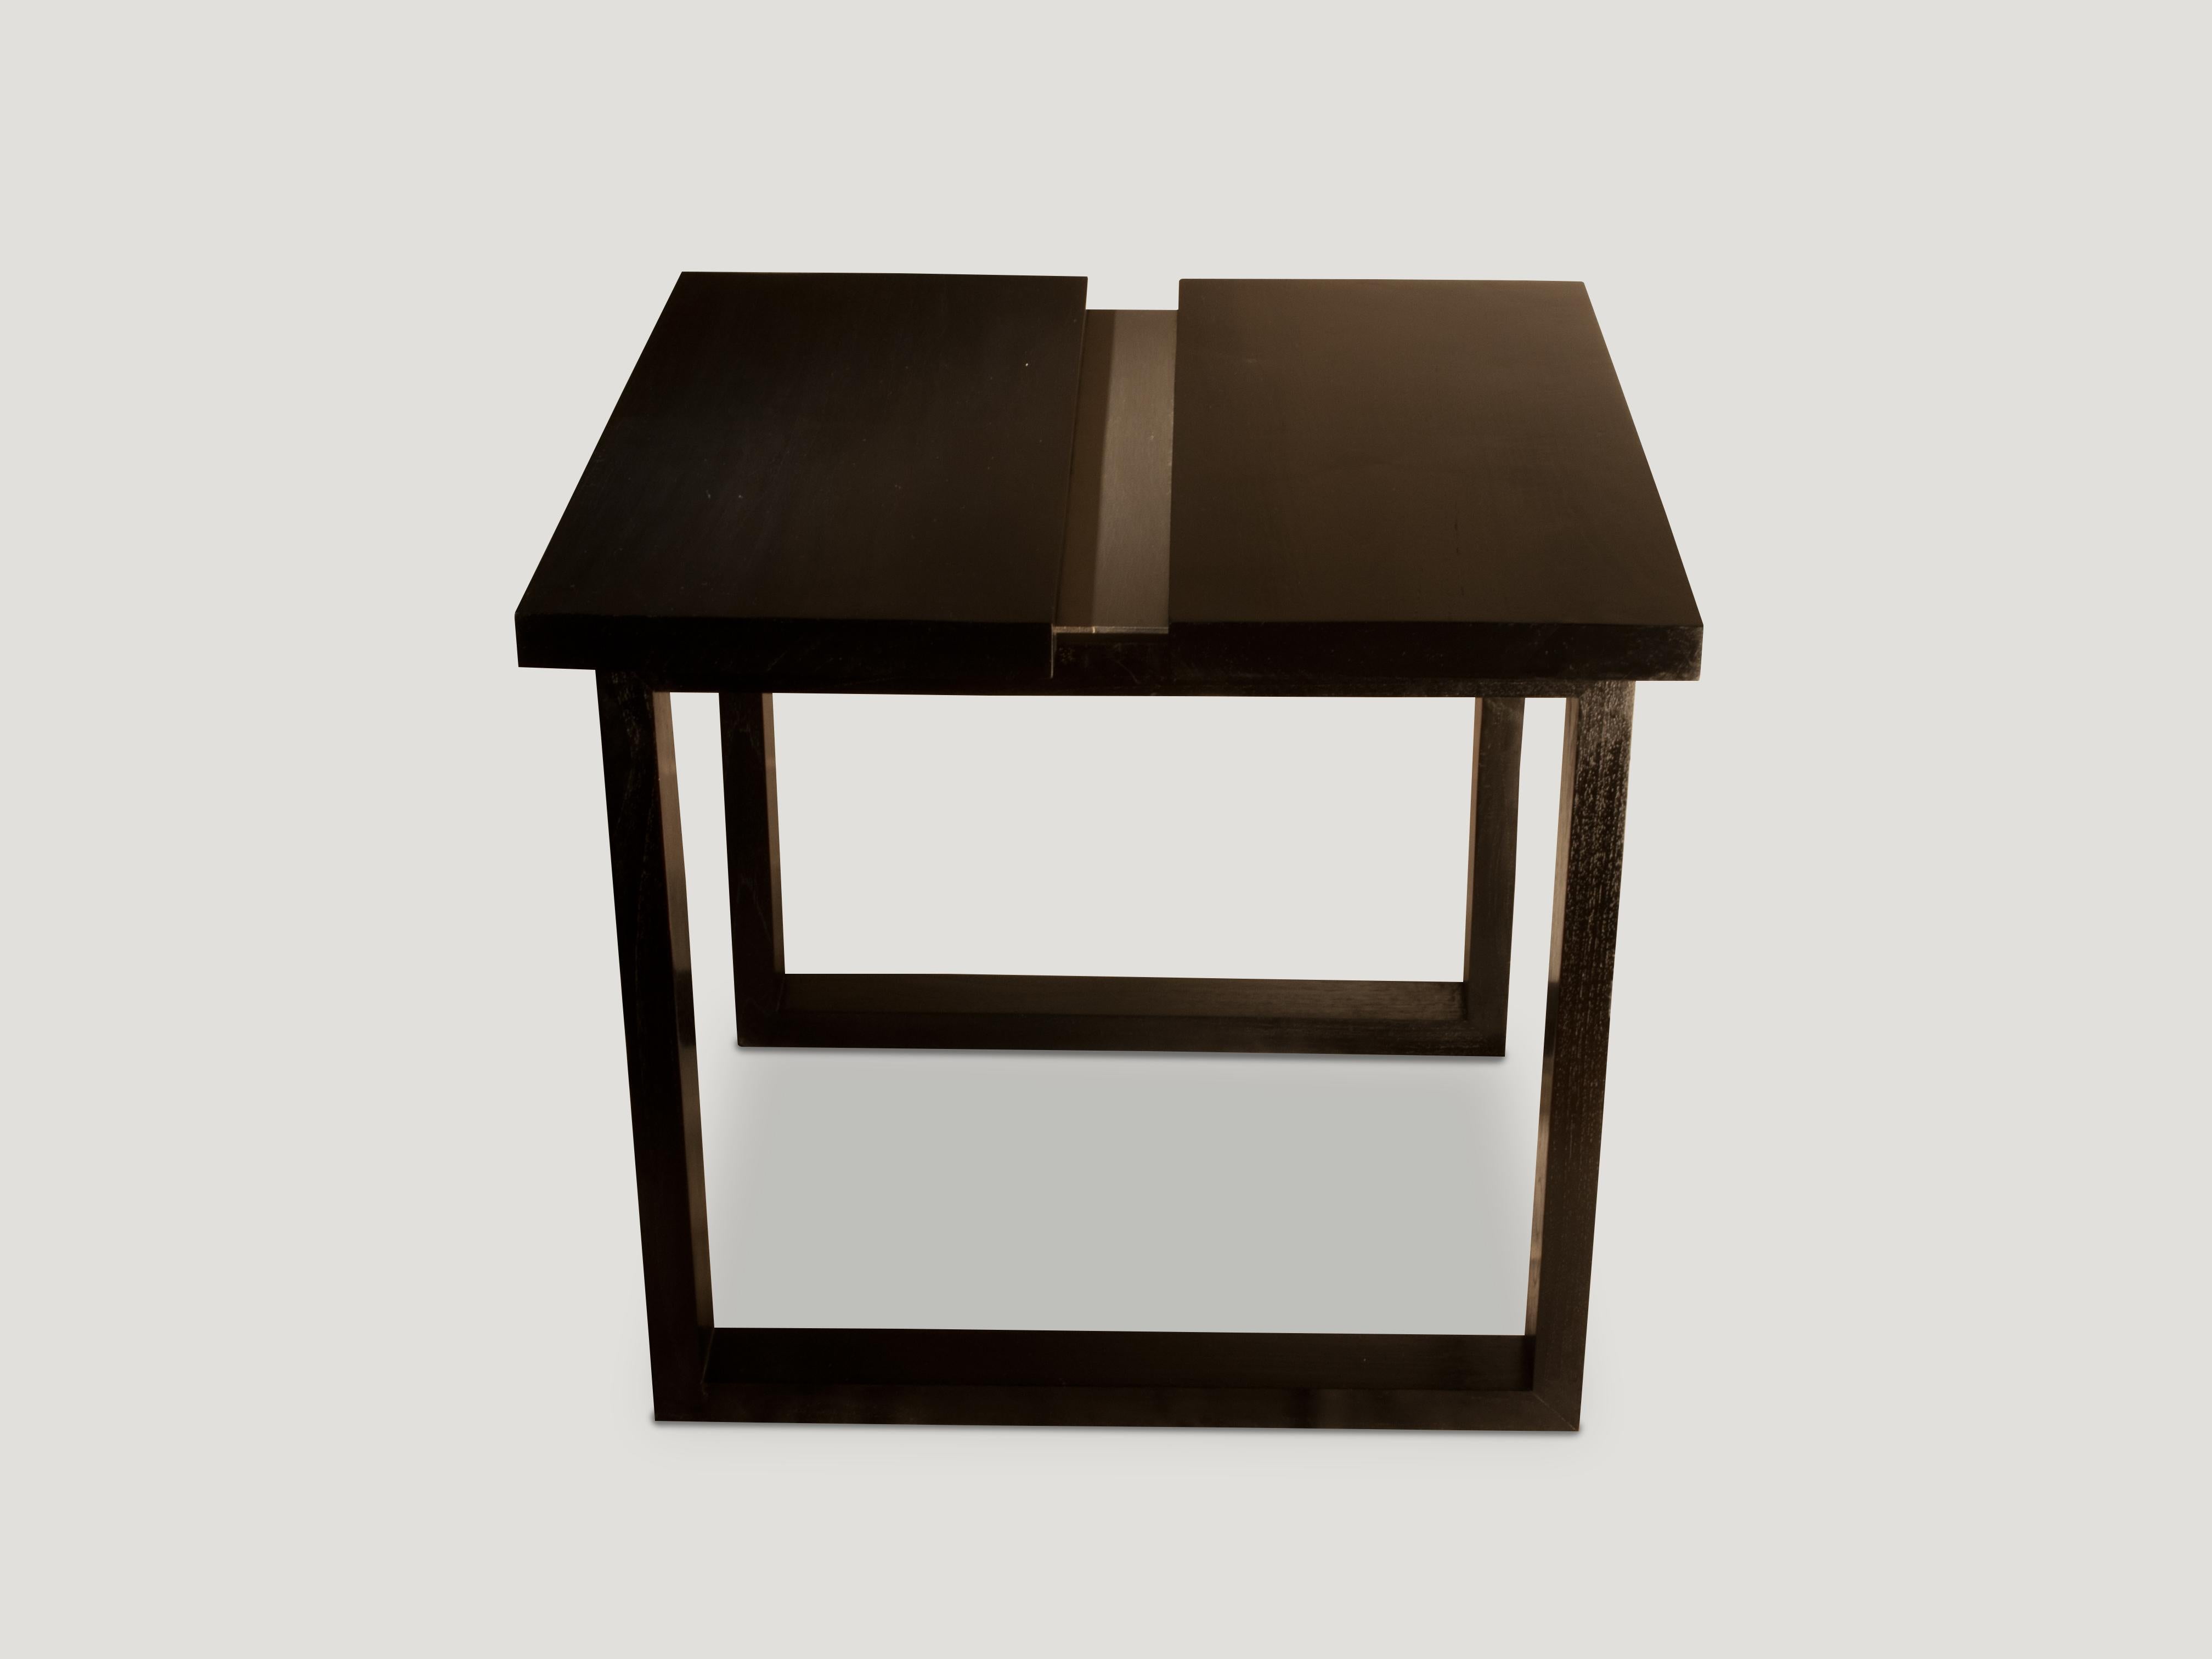 Andrianna Shamaris Espresso and Steel Minimalist Side Table In Excellent Condition For Sale In New York, NY